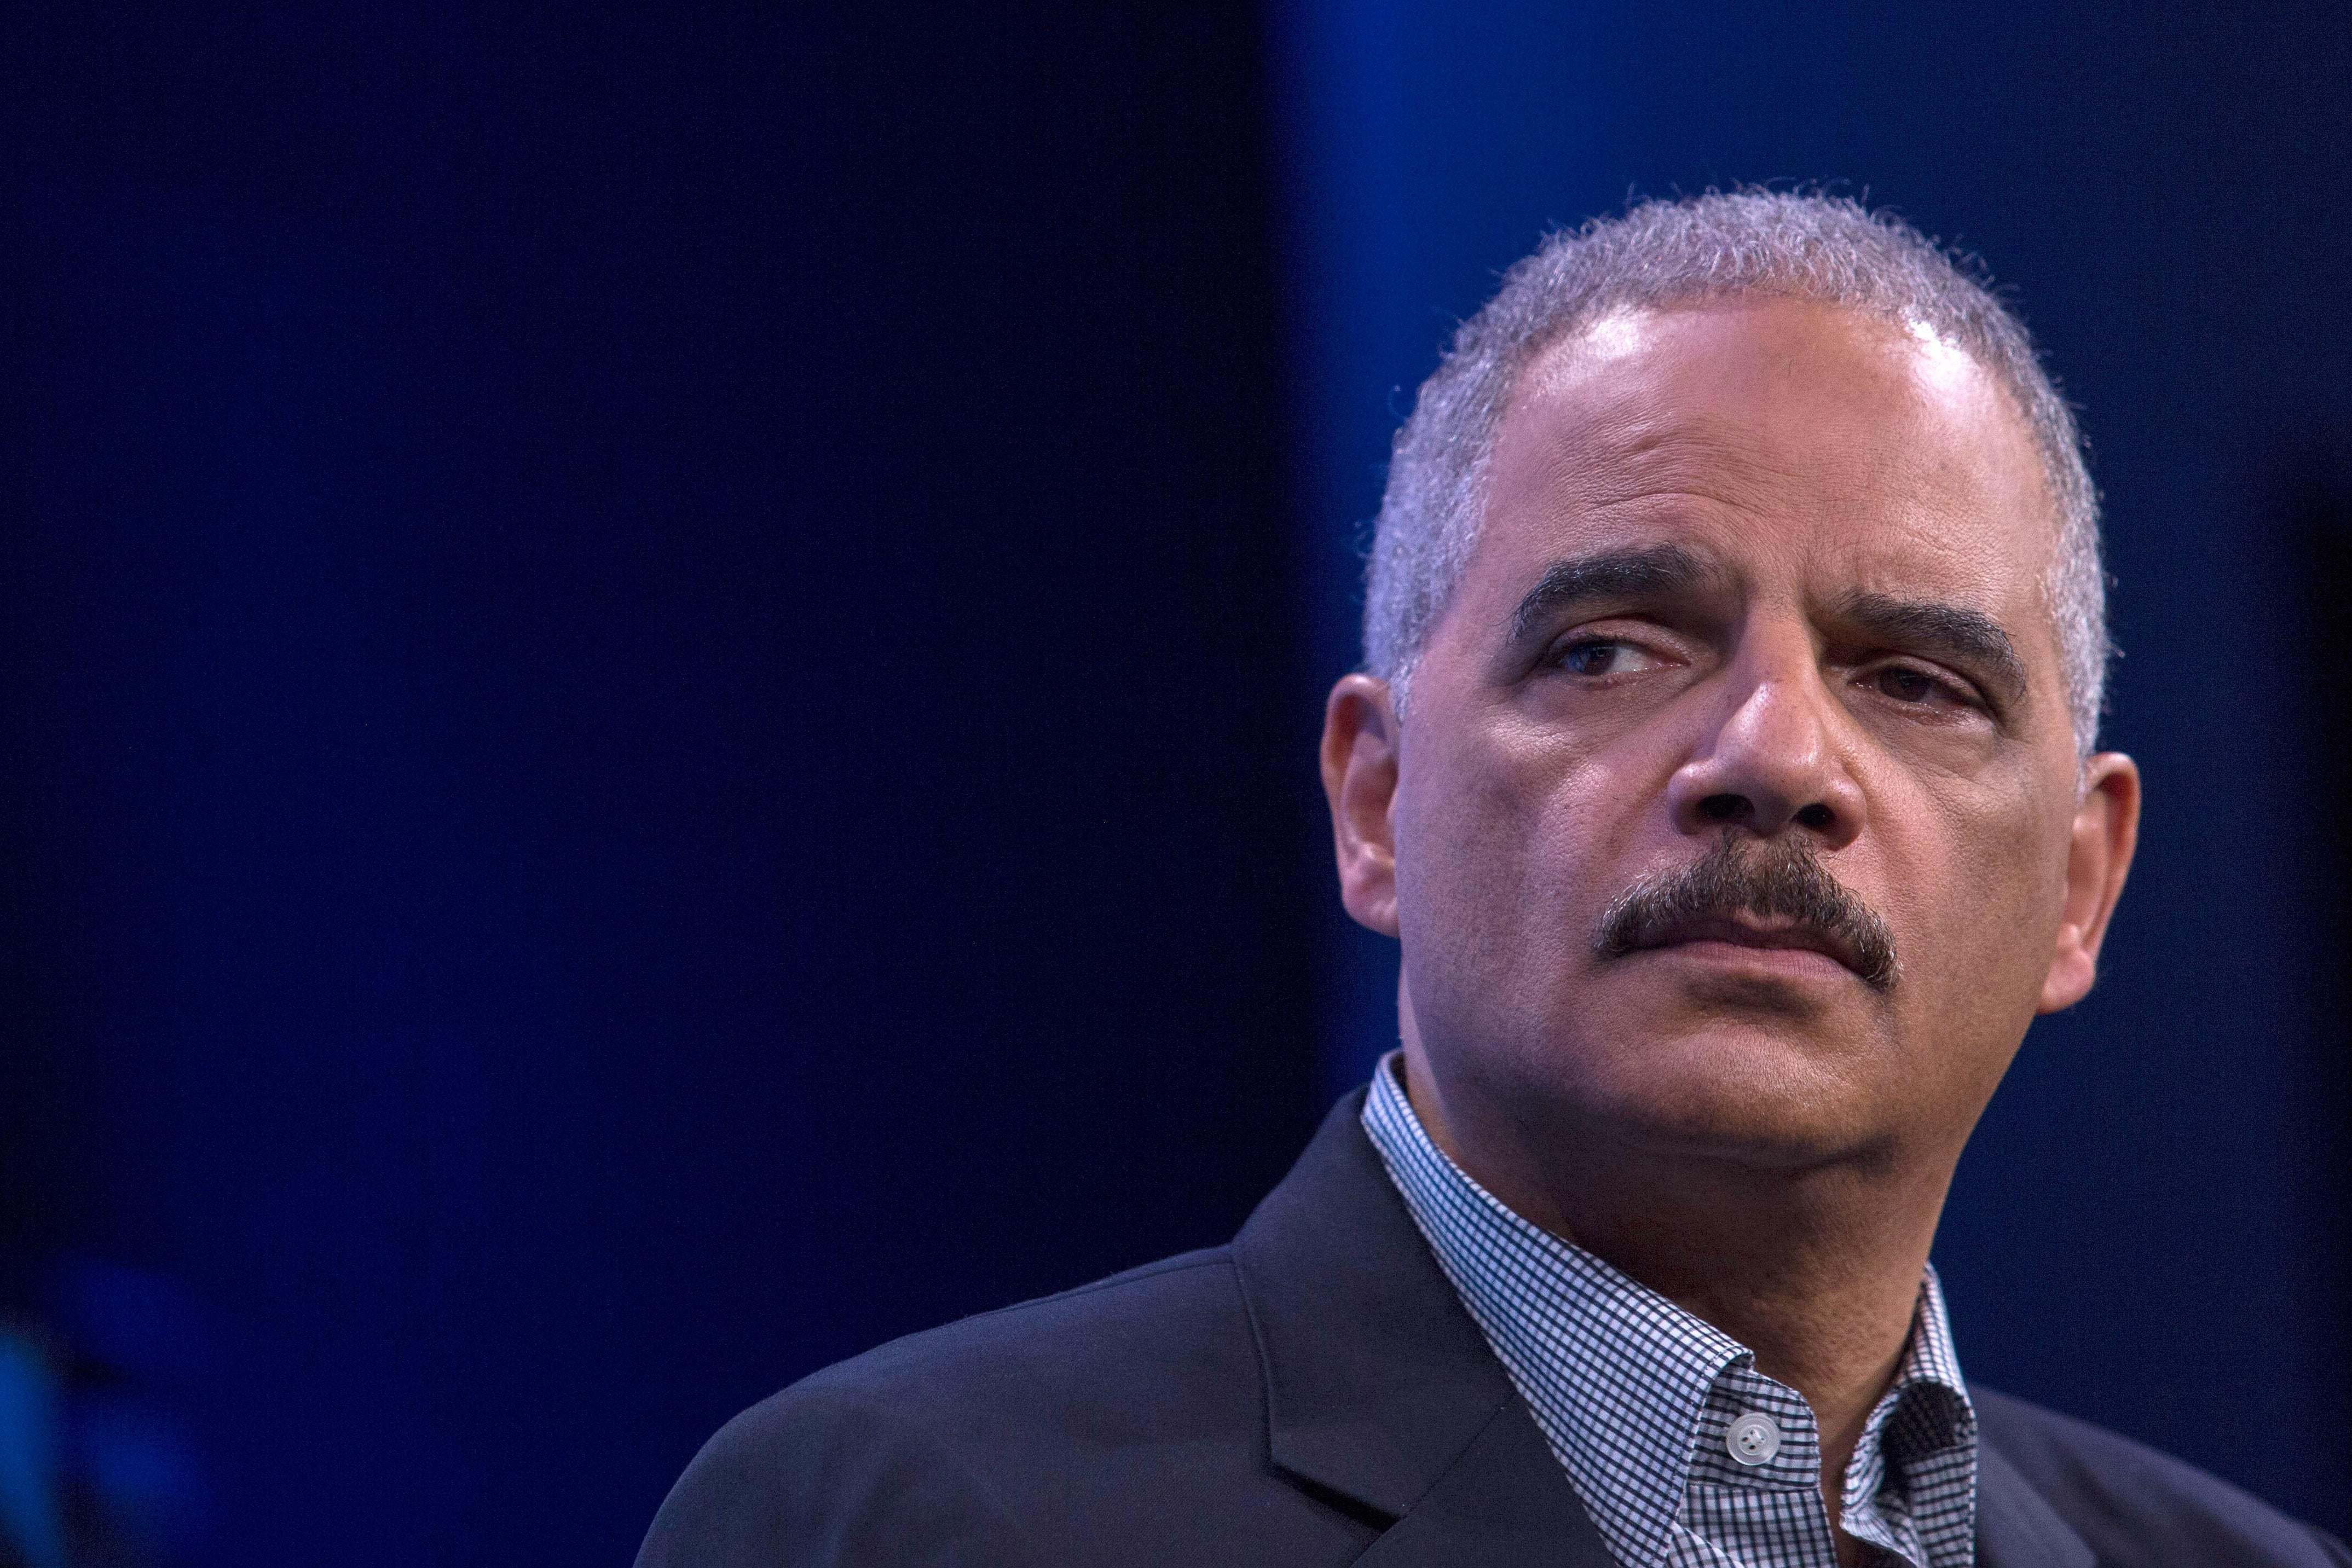 A close-up photo of the former attorney general Eric Holder, who is the chairman of the National Democratic Redistricting Committee.